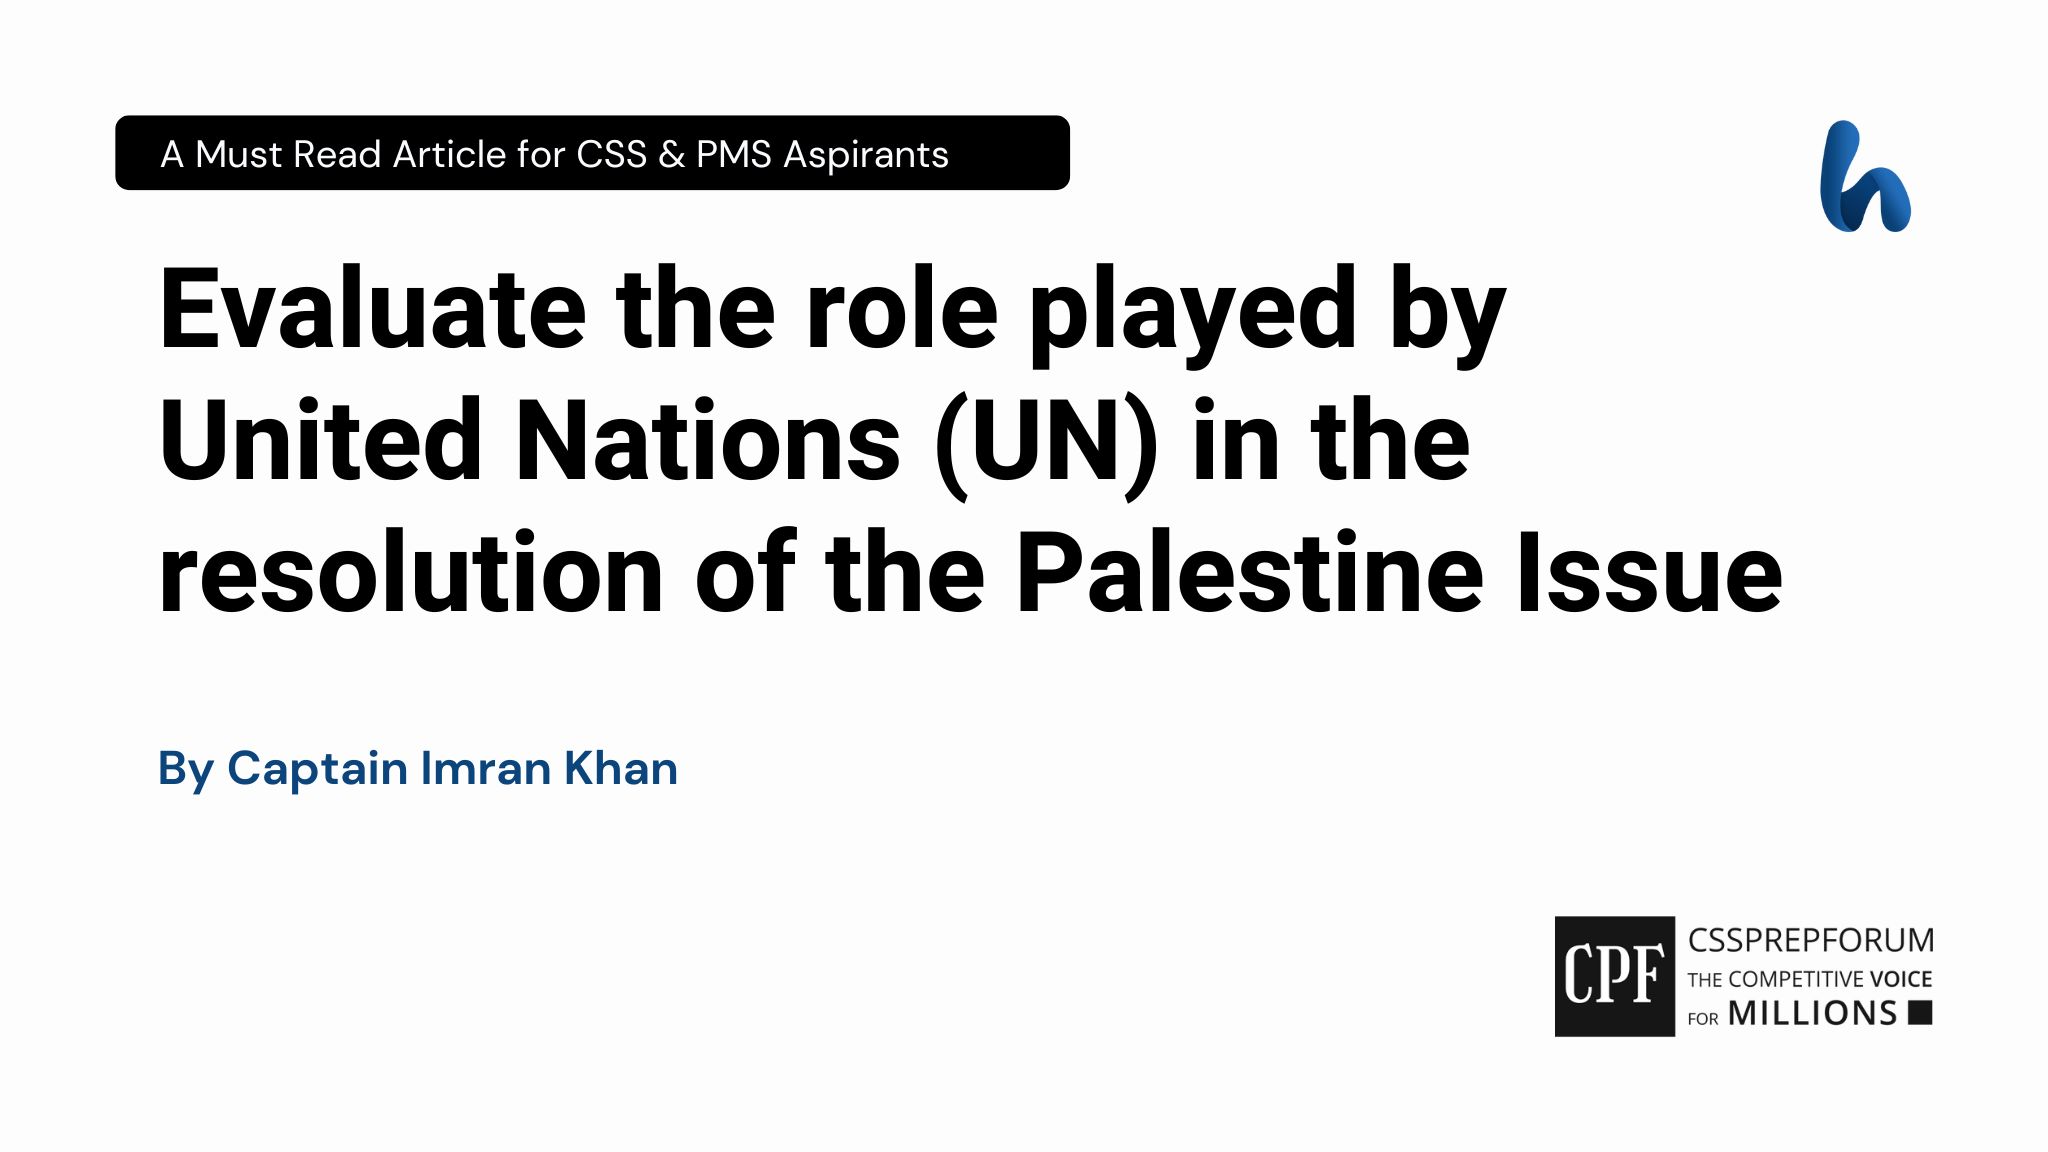 Evaluate the role played by United Nations (UN) in the resolution of the Palestine Issue by Captain Imran Khan